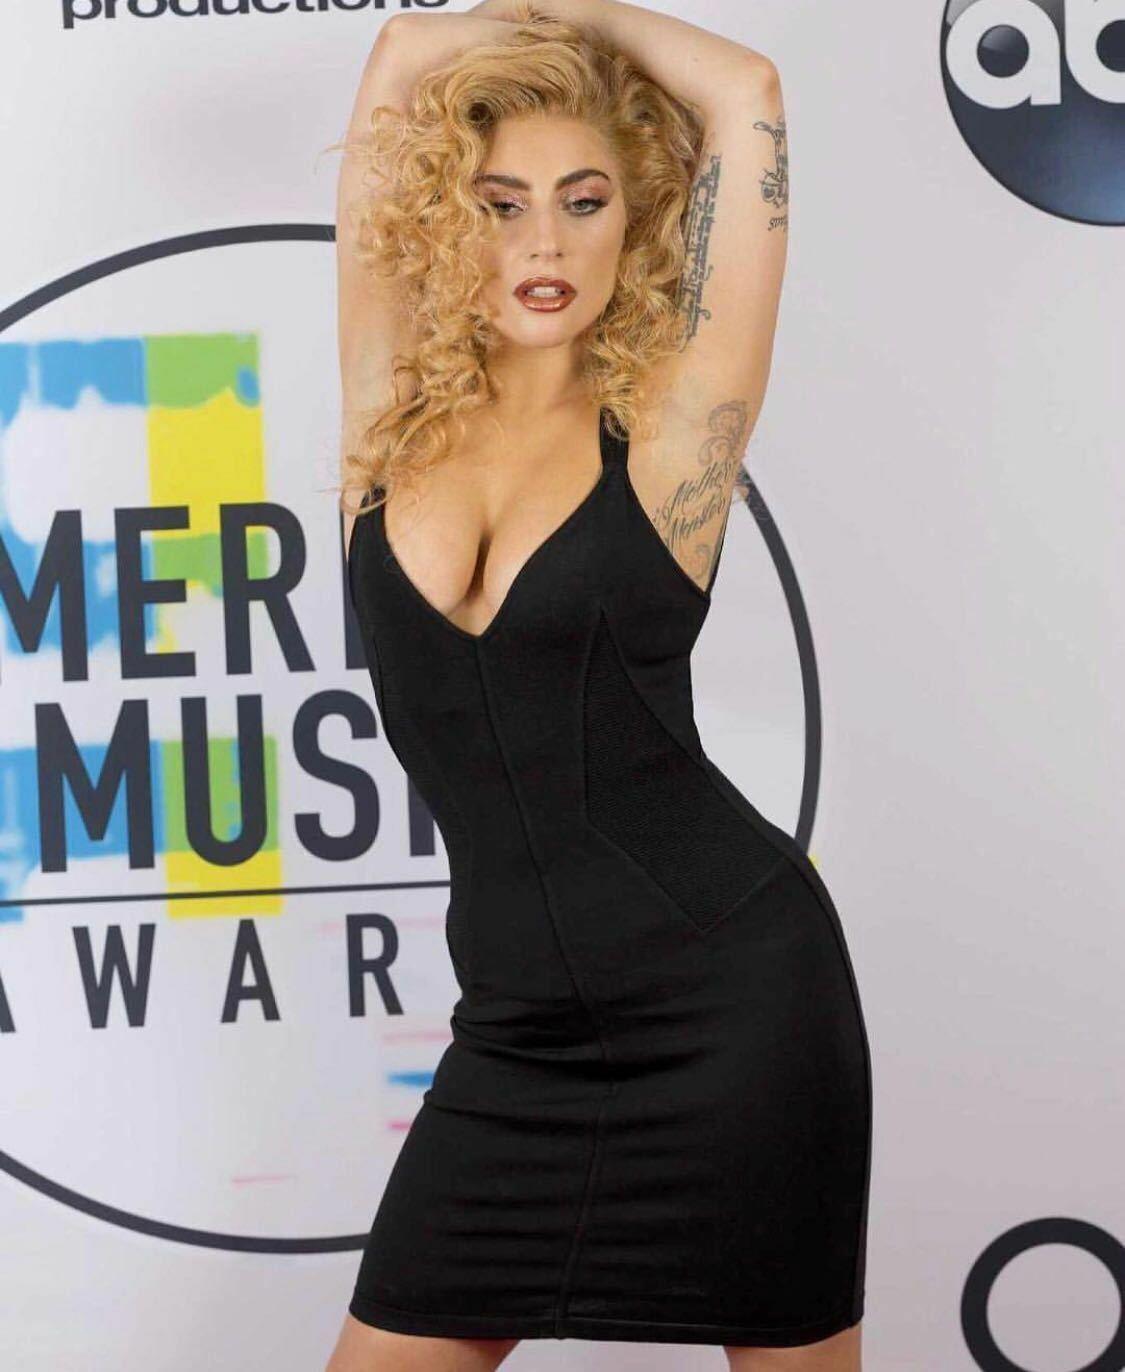 runway ALAIA Vintage SS1990 black triple strap bodycon stretch dress M UK6 UK10
AZZEDINE ALAIA VINTAGE
FROM THE SPRING SUMMER 1990 RUNWAY
AS SEEN ON: LADY GAGA AT 2017 AMA'S
RAYON, ELASTANE. 
BLACK . 
SIGNATURE TRIPLE SHOULDER STRAP DESIGN AS SEEN